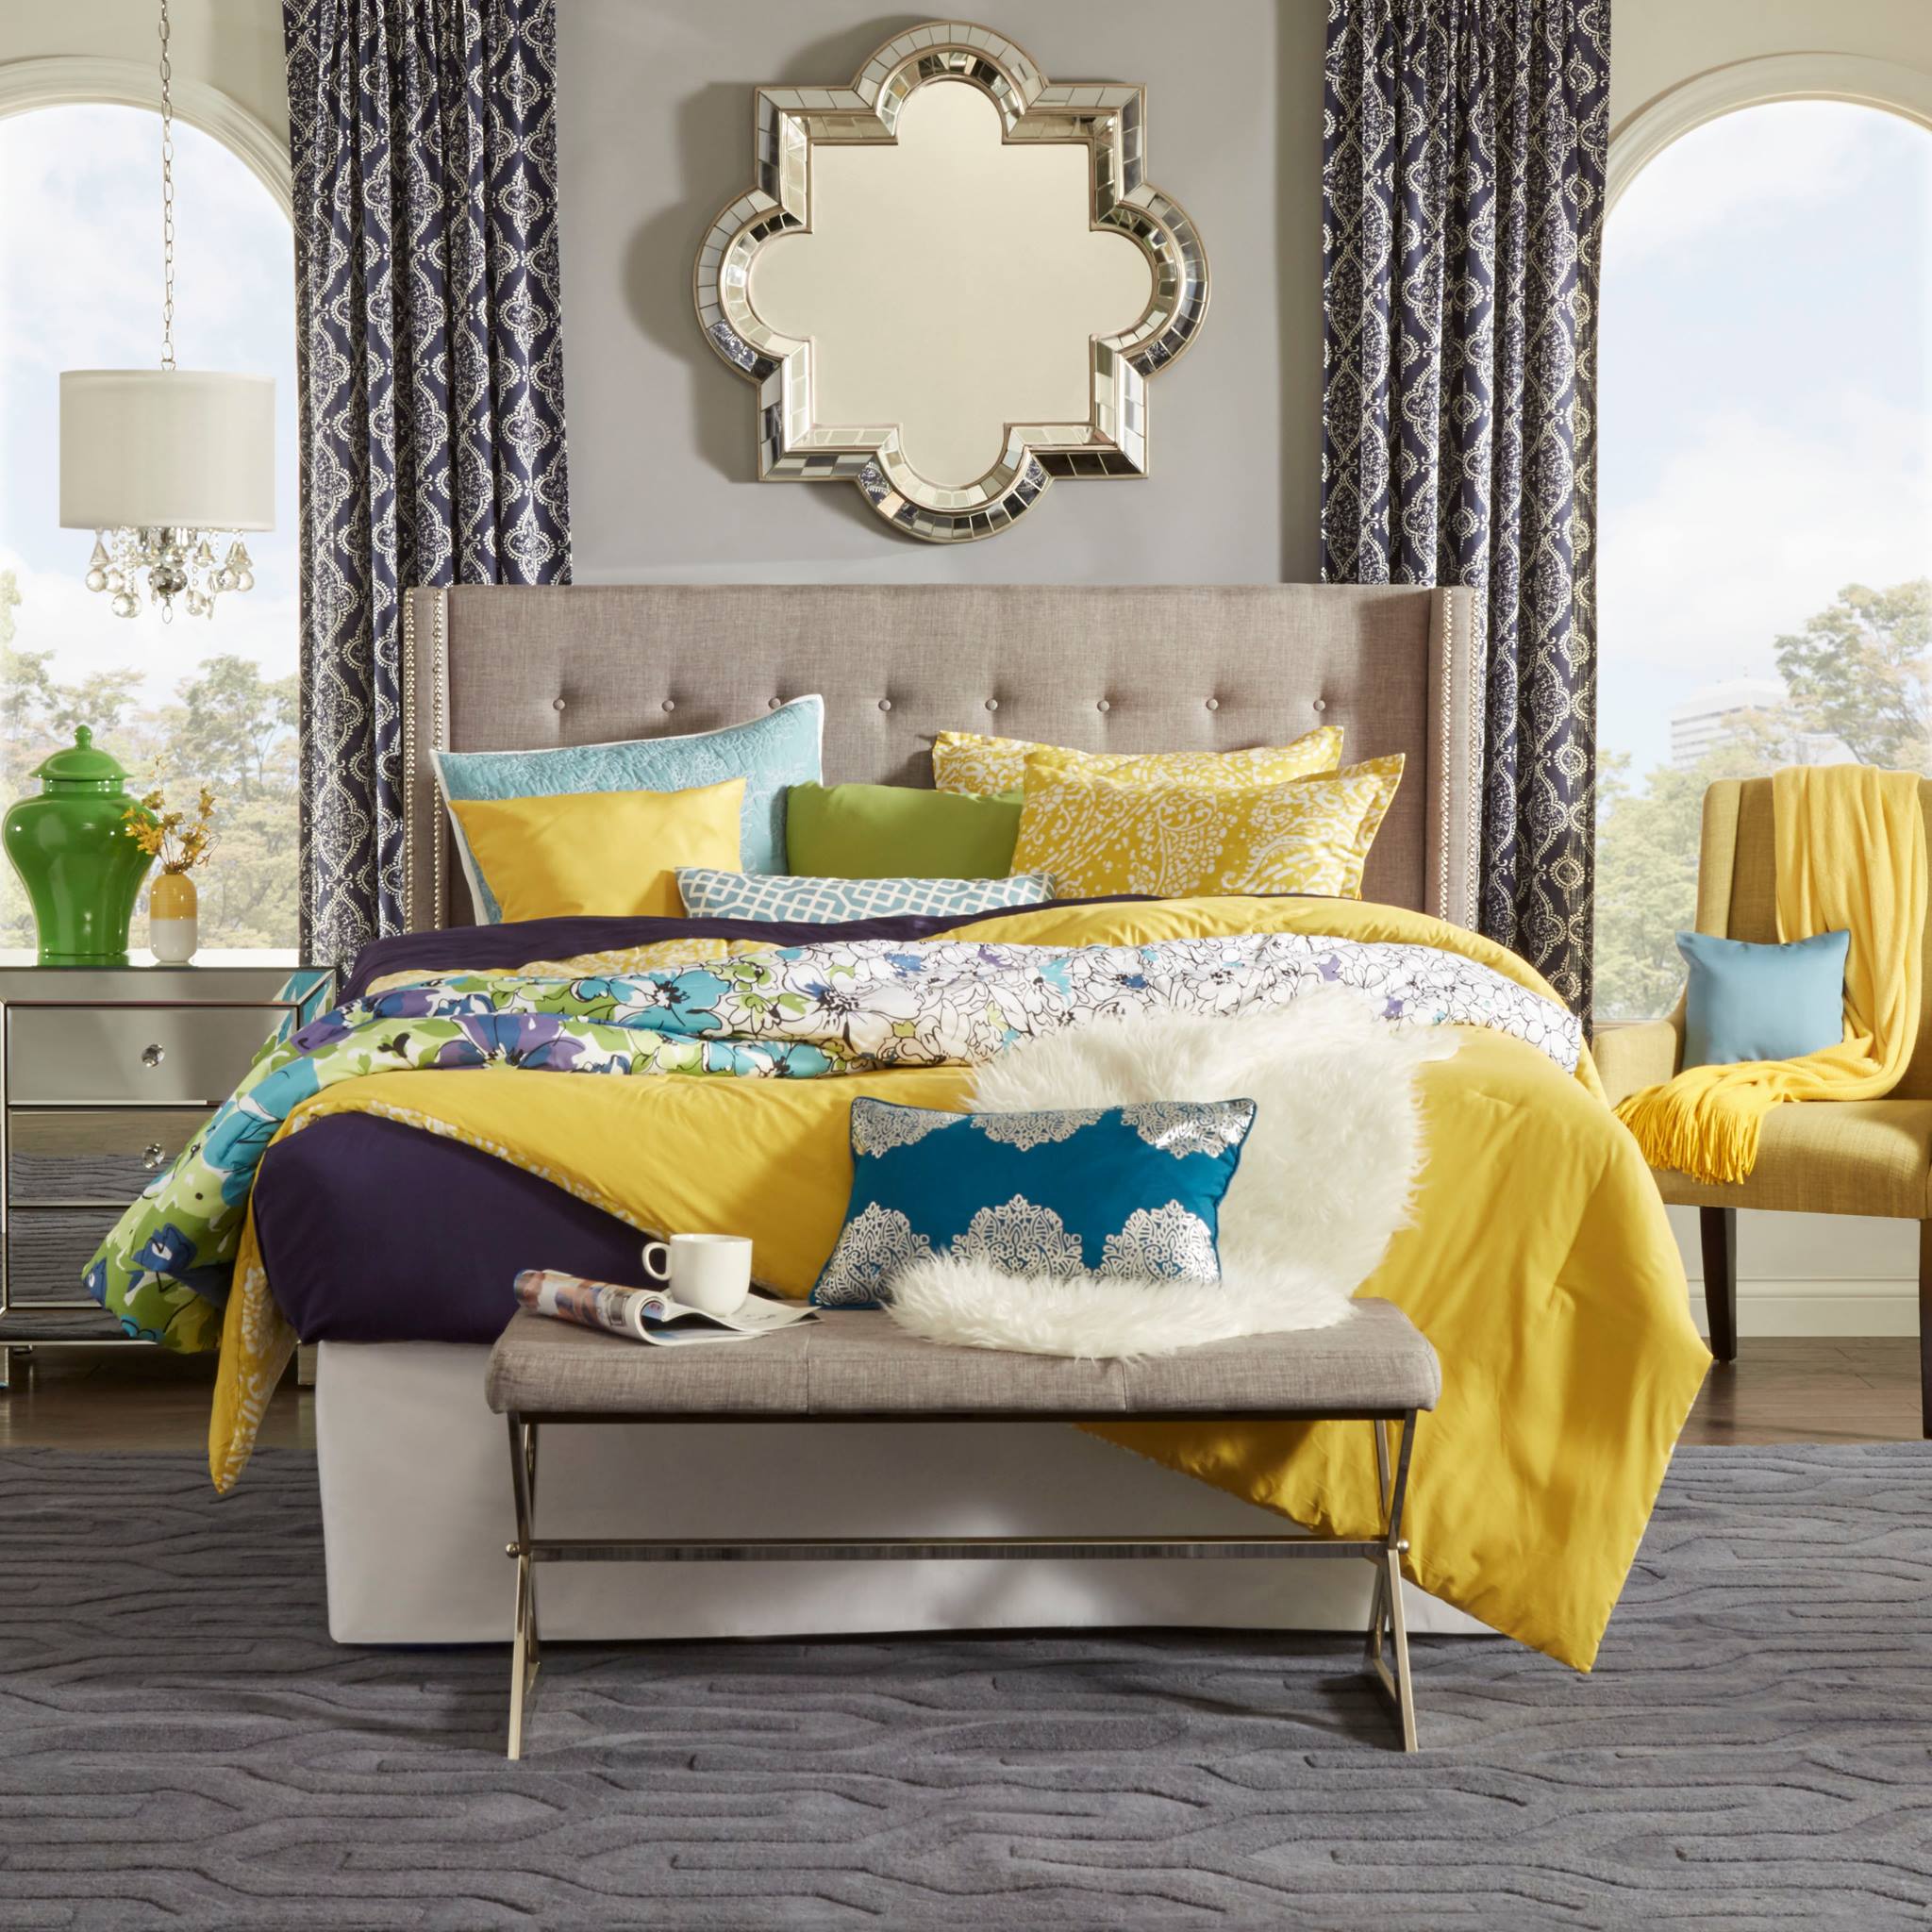 Pictured here is a bedroom with a feminine aesthetic full of a variety of colors. The beige linen upholstered button tufted wingback bed is dressed with sheets, blankets, and pillows in yellow, green, blue, and purple colors. There is a beige linen upholstered bench at the foot of the bed, which also has a pillow and blanket on.